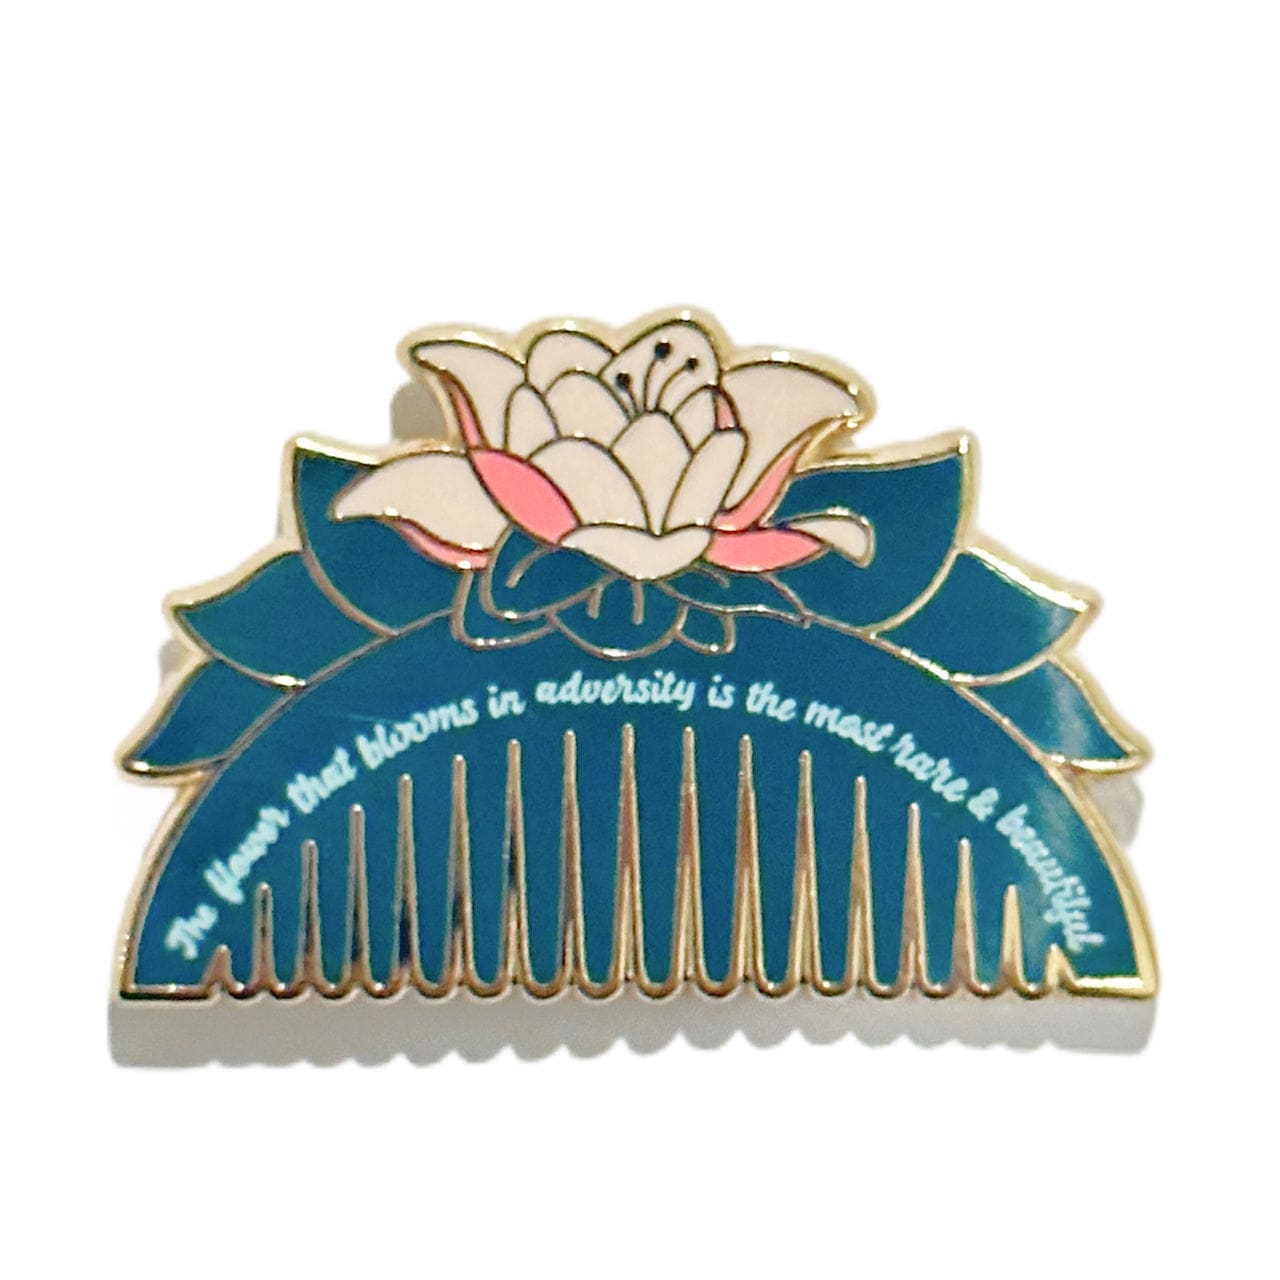 Pinbuds Enamel pin Princess China hair piece comb pin featuring quote "The flower that blooms in adversity is the most rare and beautiful of all."